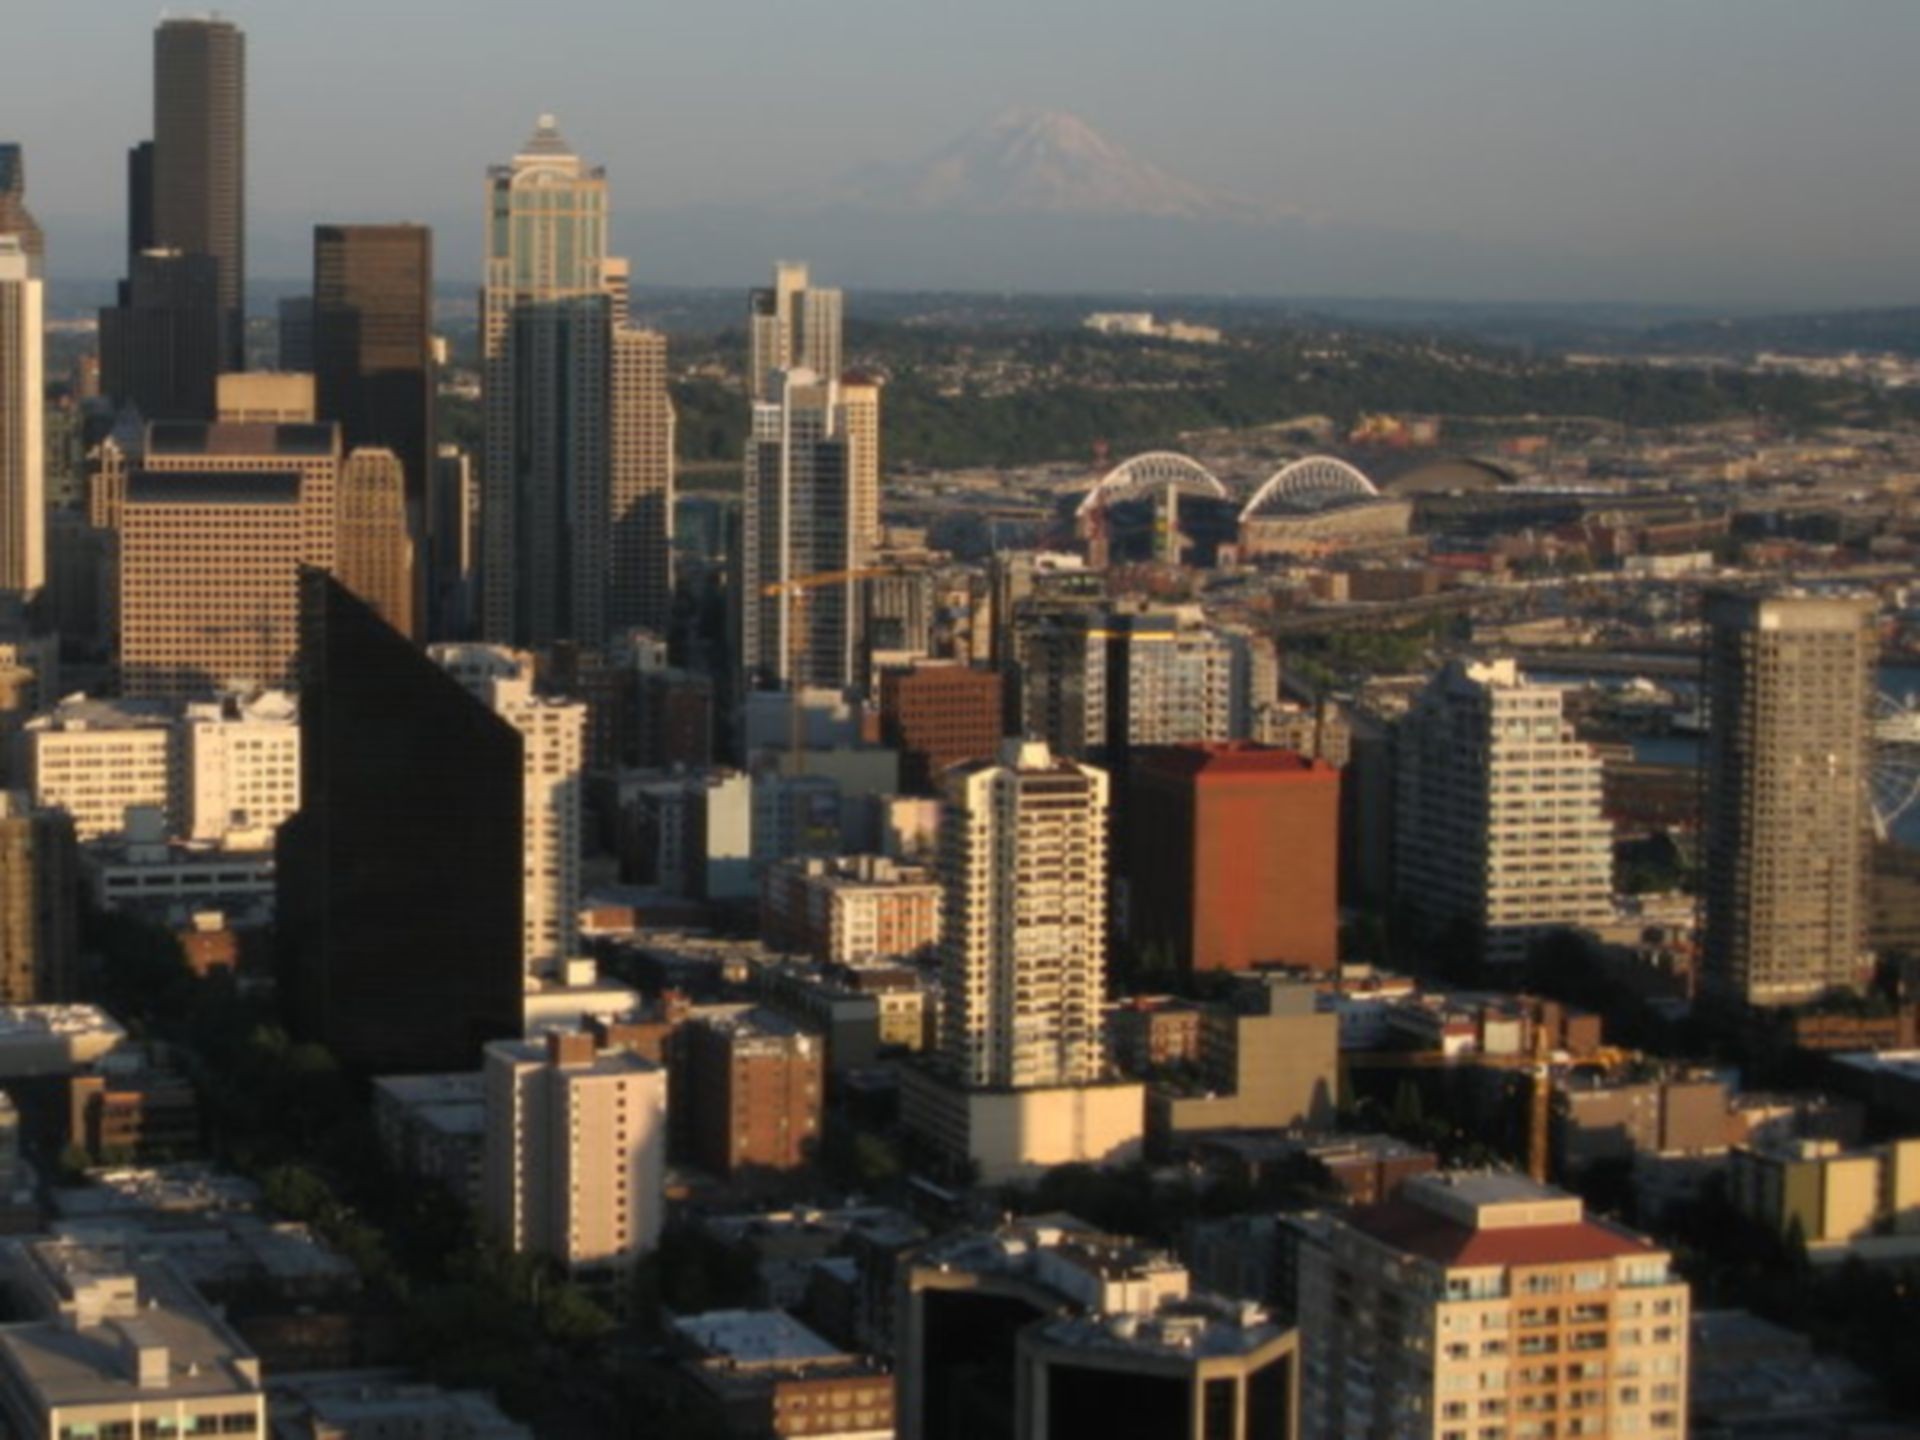 A beautiful view of buildings from Space Needle in Seattle